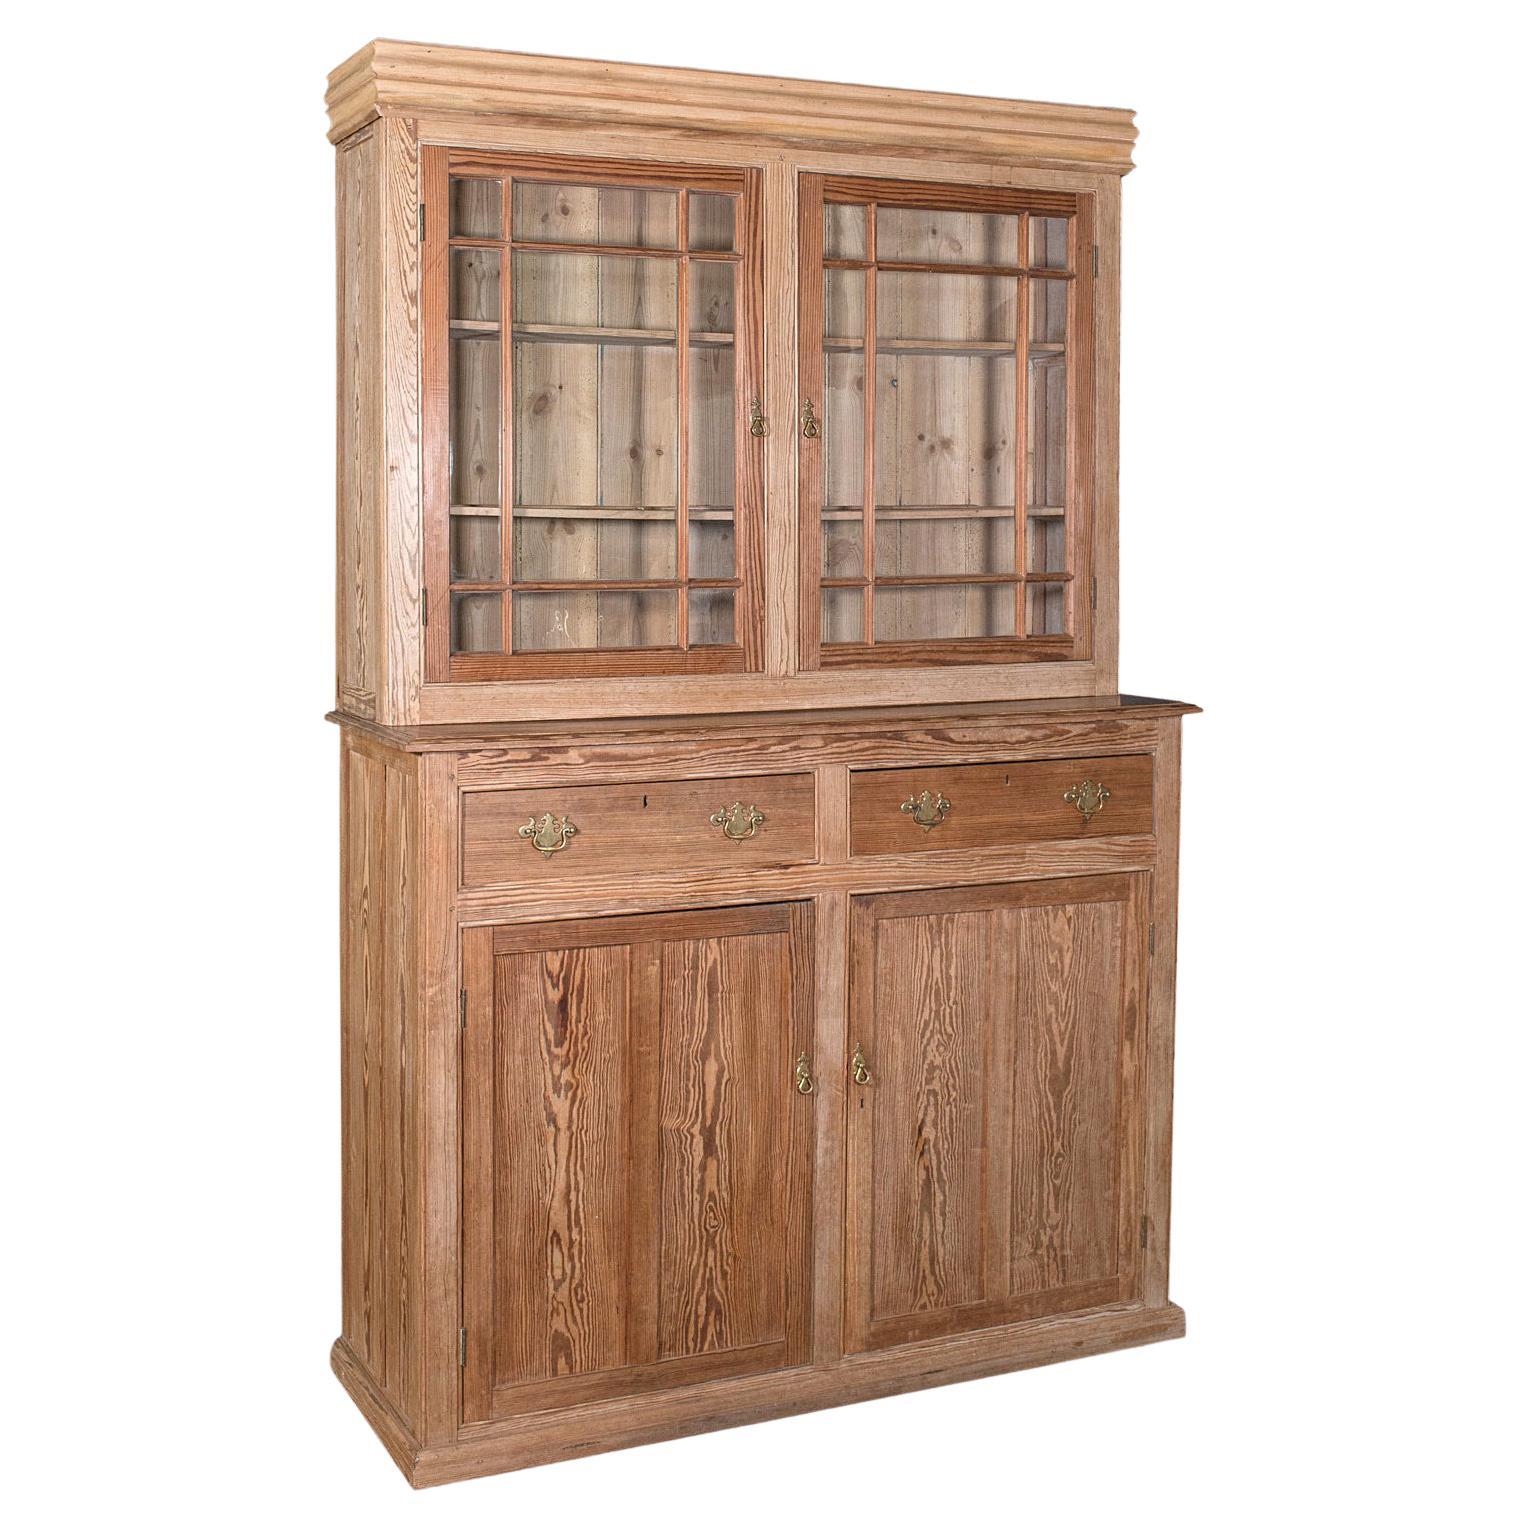 Armoire ancienne anglaise, pin, armoire Larder, victorienne, vers 1850